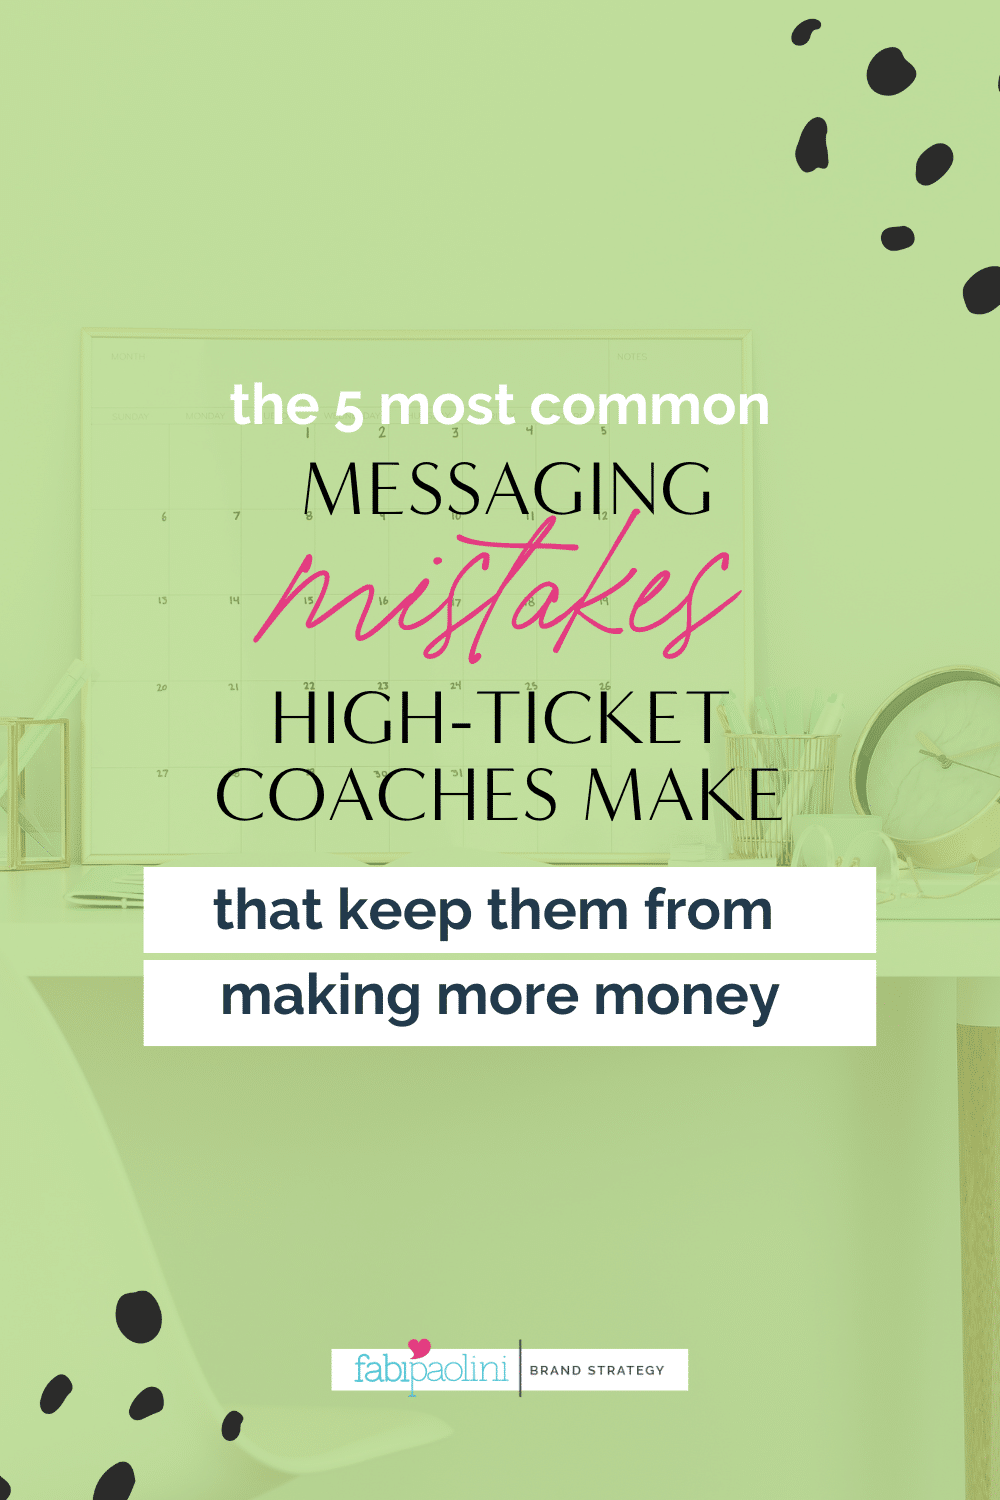 5 mistakes to avoid if you want to master high-ticket messaging to attract more high-ticket clients into your coaching business Fabi Paolini brand strategy